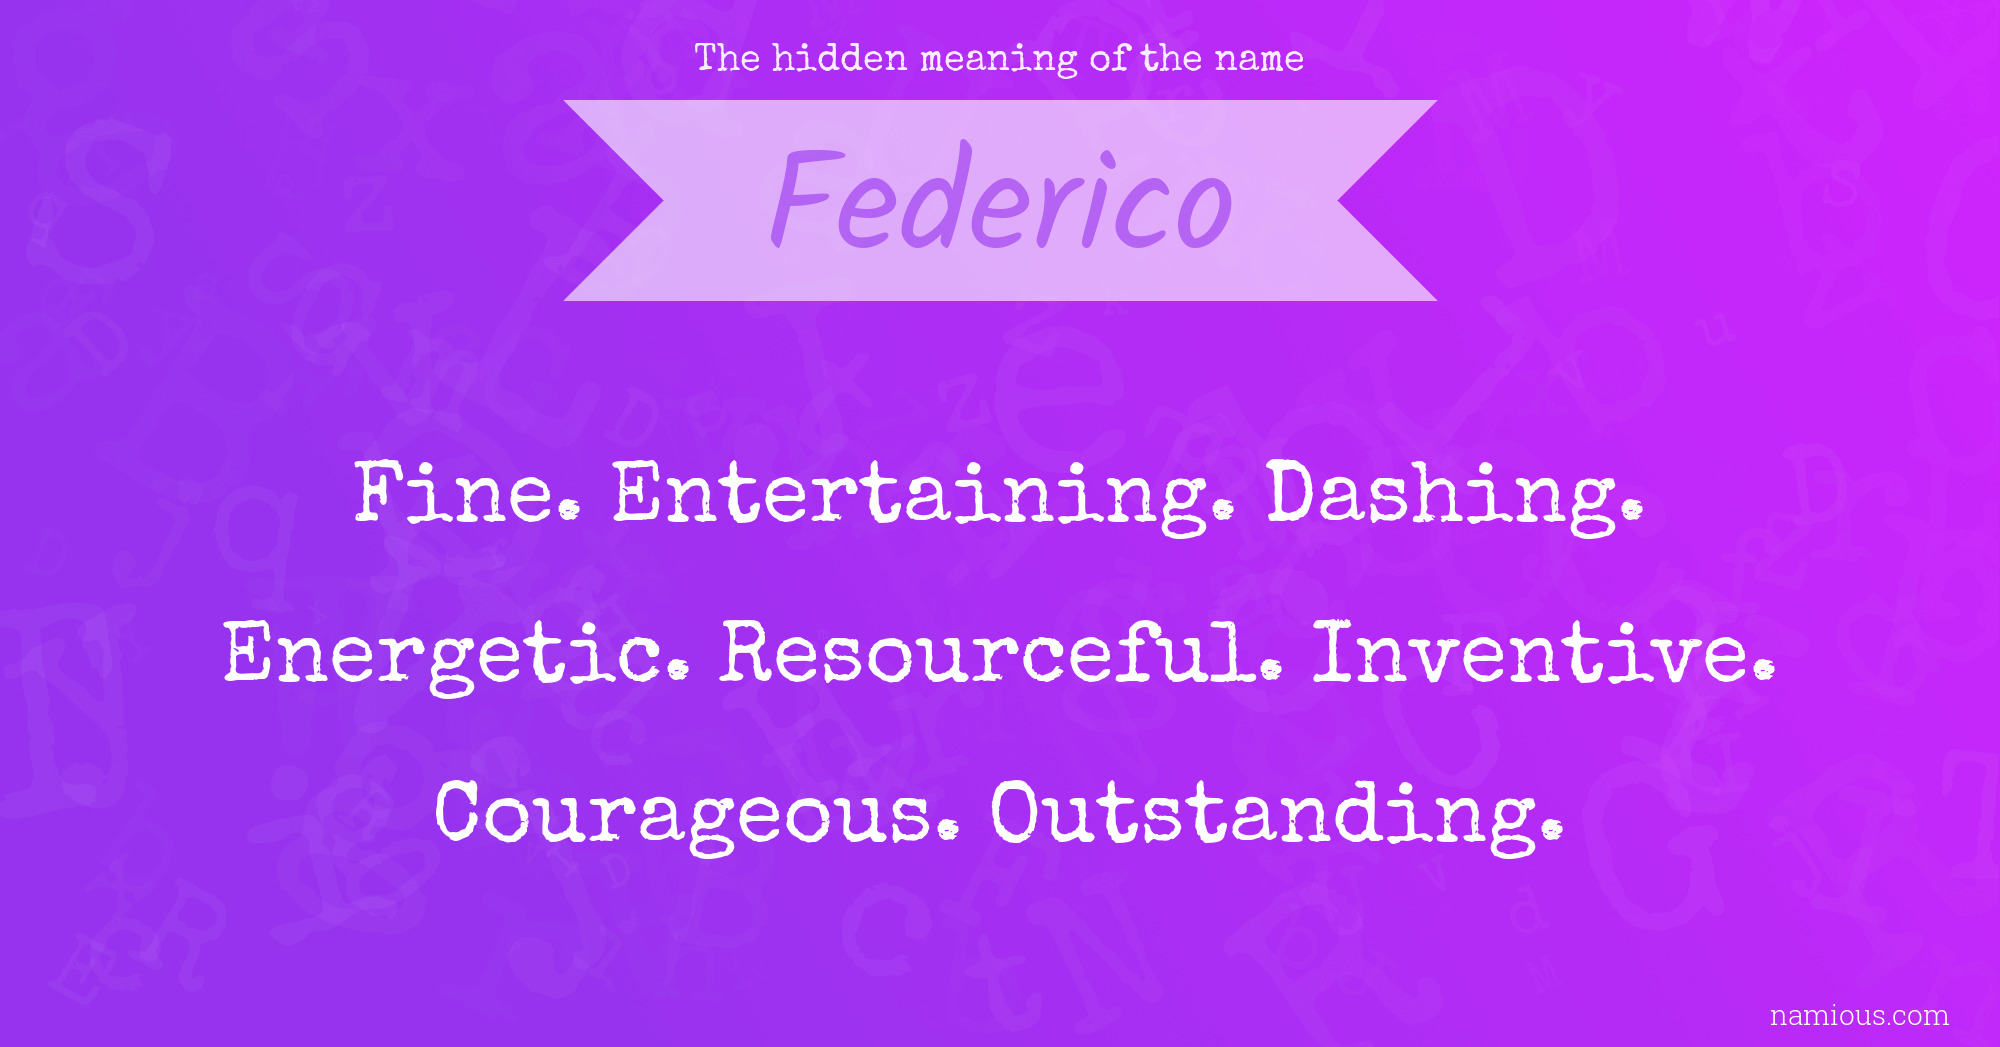 The hidden meaning of the name Federico